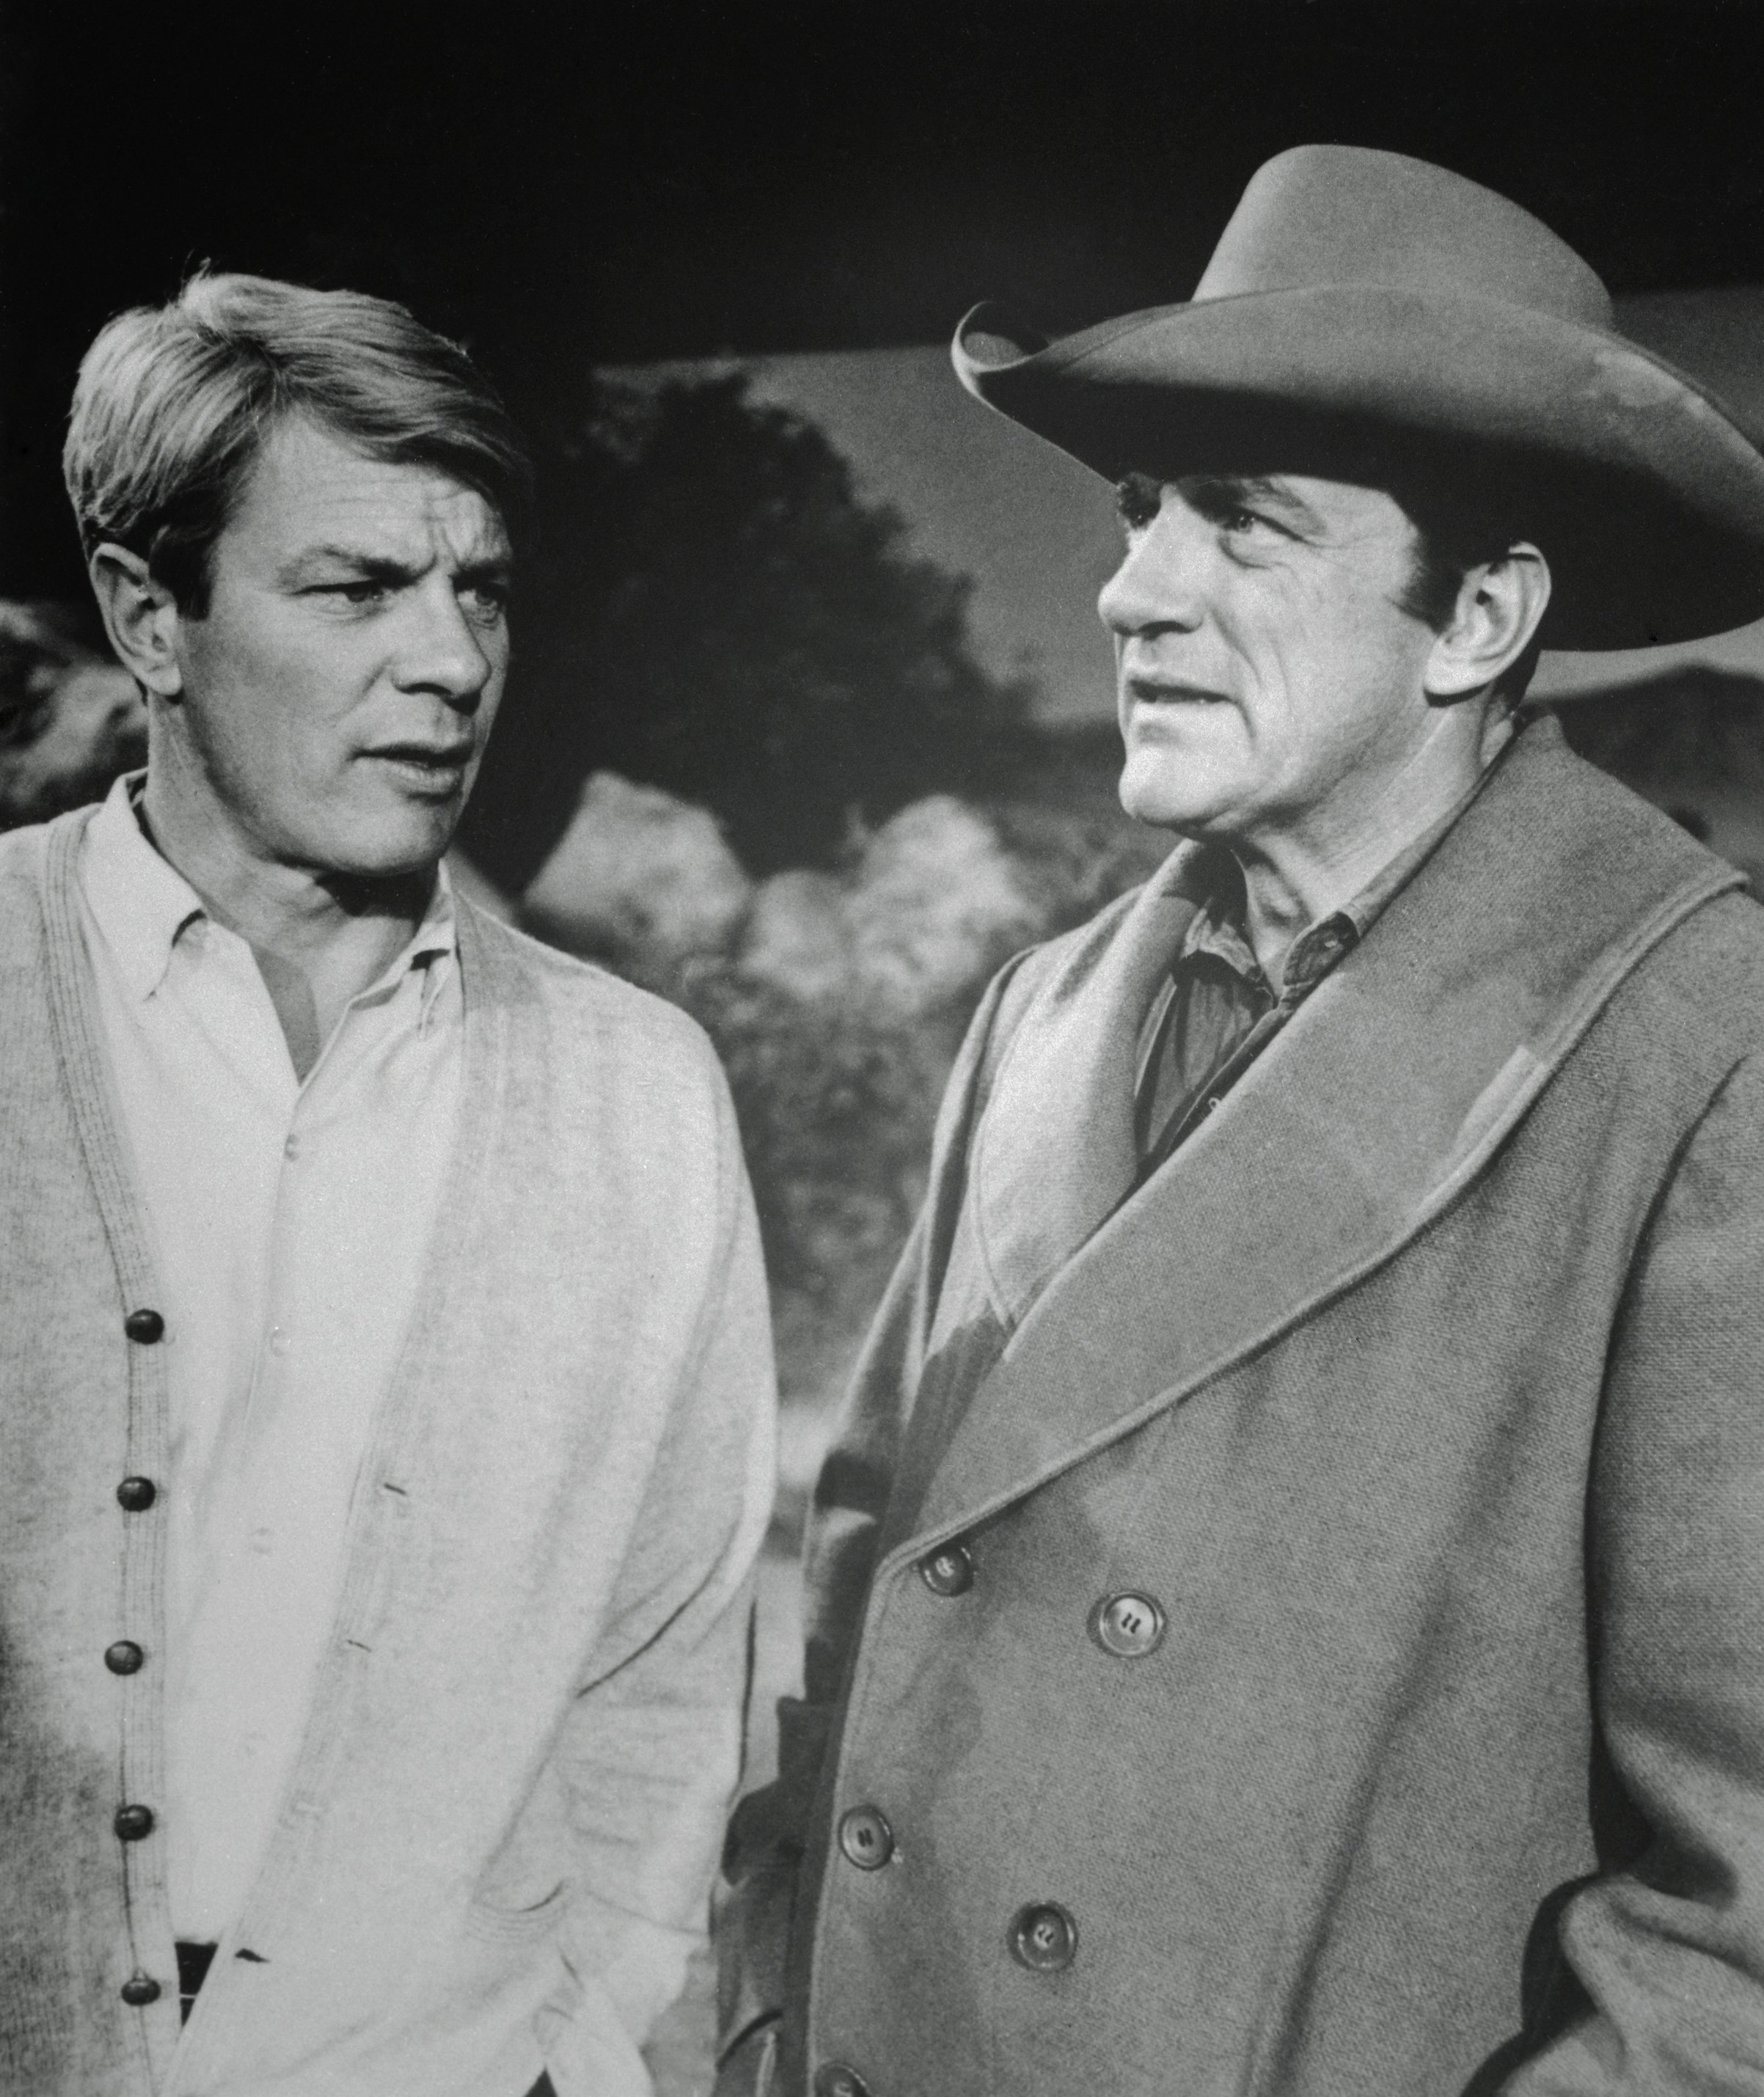 Actor James Arness (right) with his brother, actor Peter Graves.| Source: Getty Images